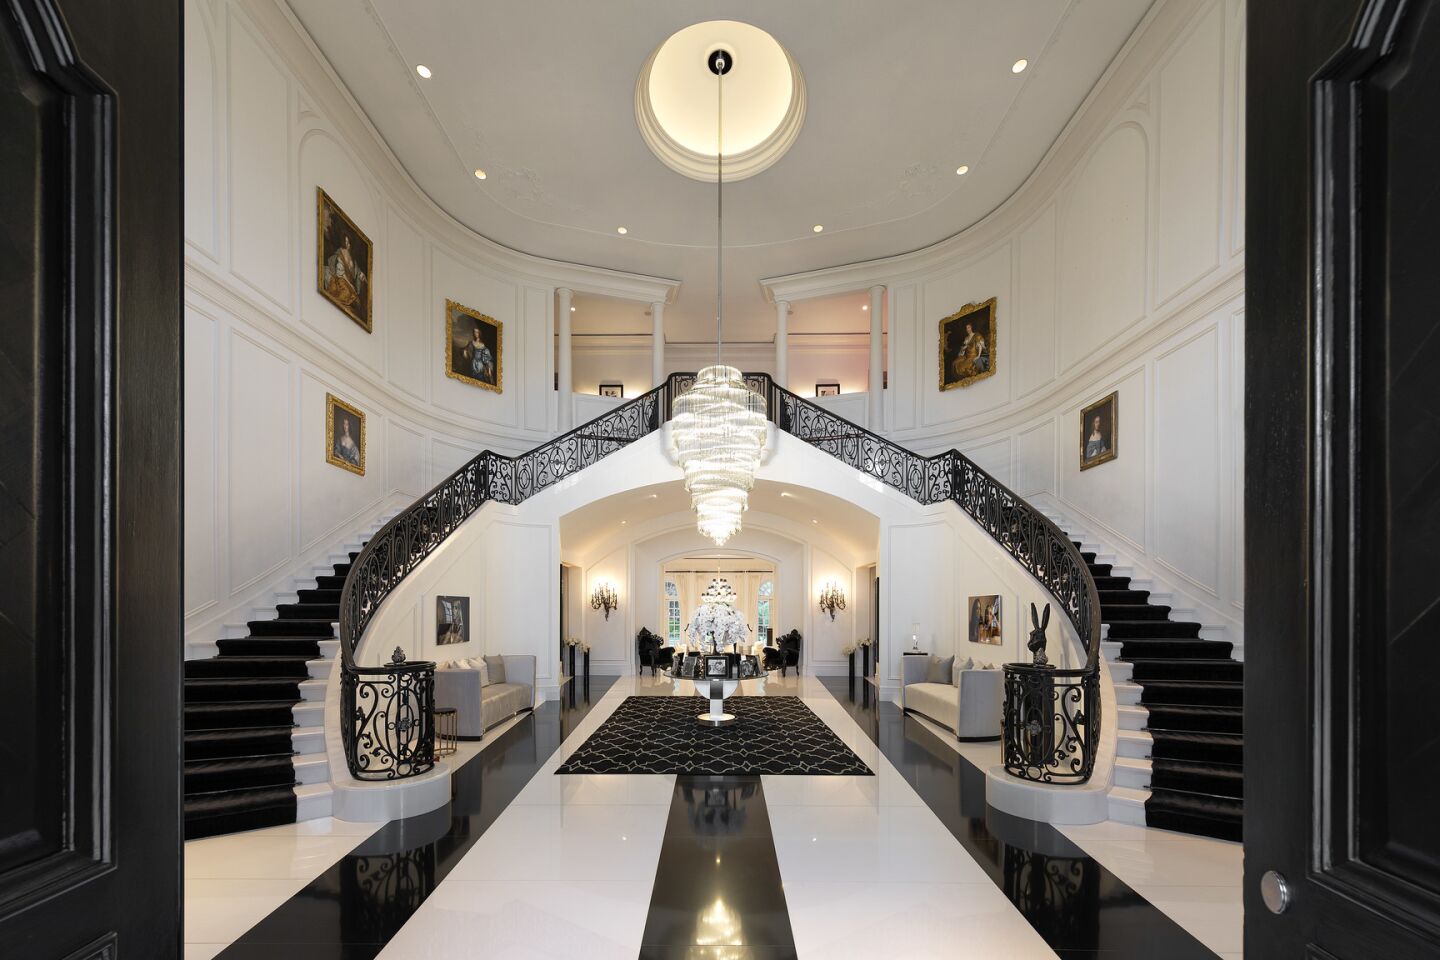 The foyer.